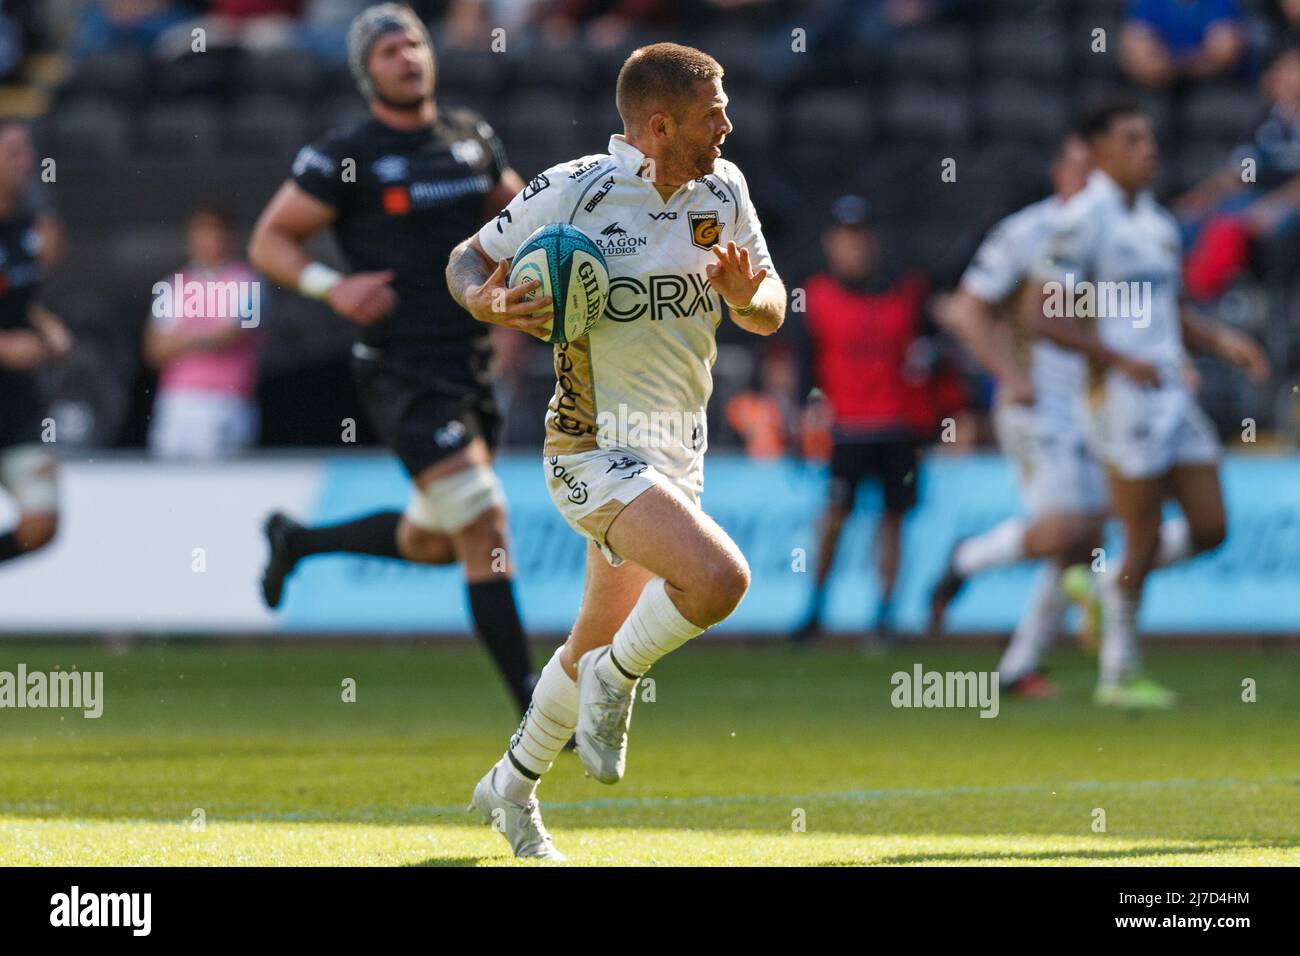 Swansea, UK. 8 May, 2022. Lewis Jones of Dragons runs in to score a try during the Ospreys v Dragons United Rugby Championship Match. Credit: Gruffydd ThomasAlamy Stock Photo